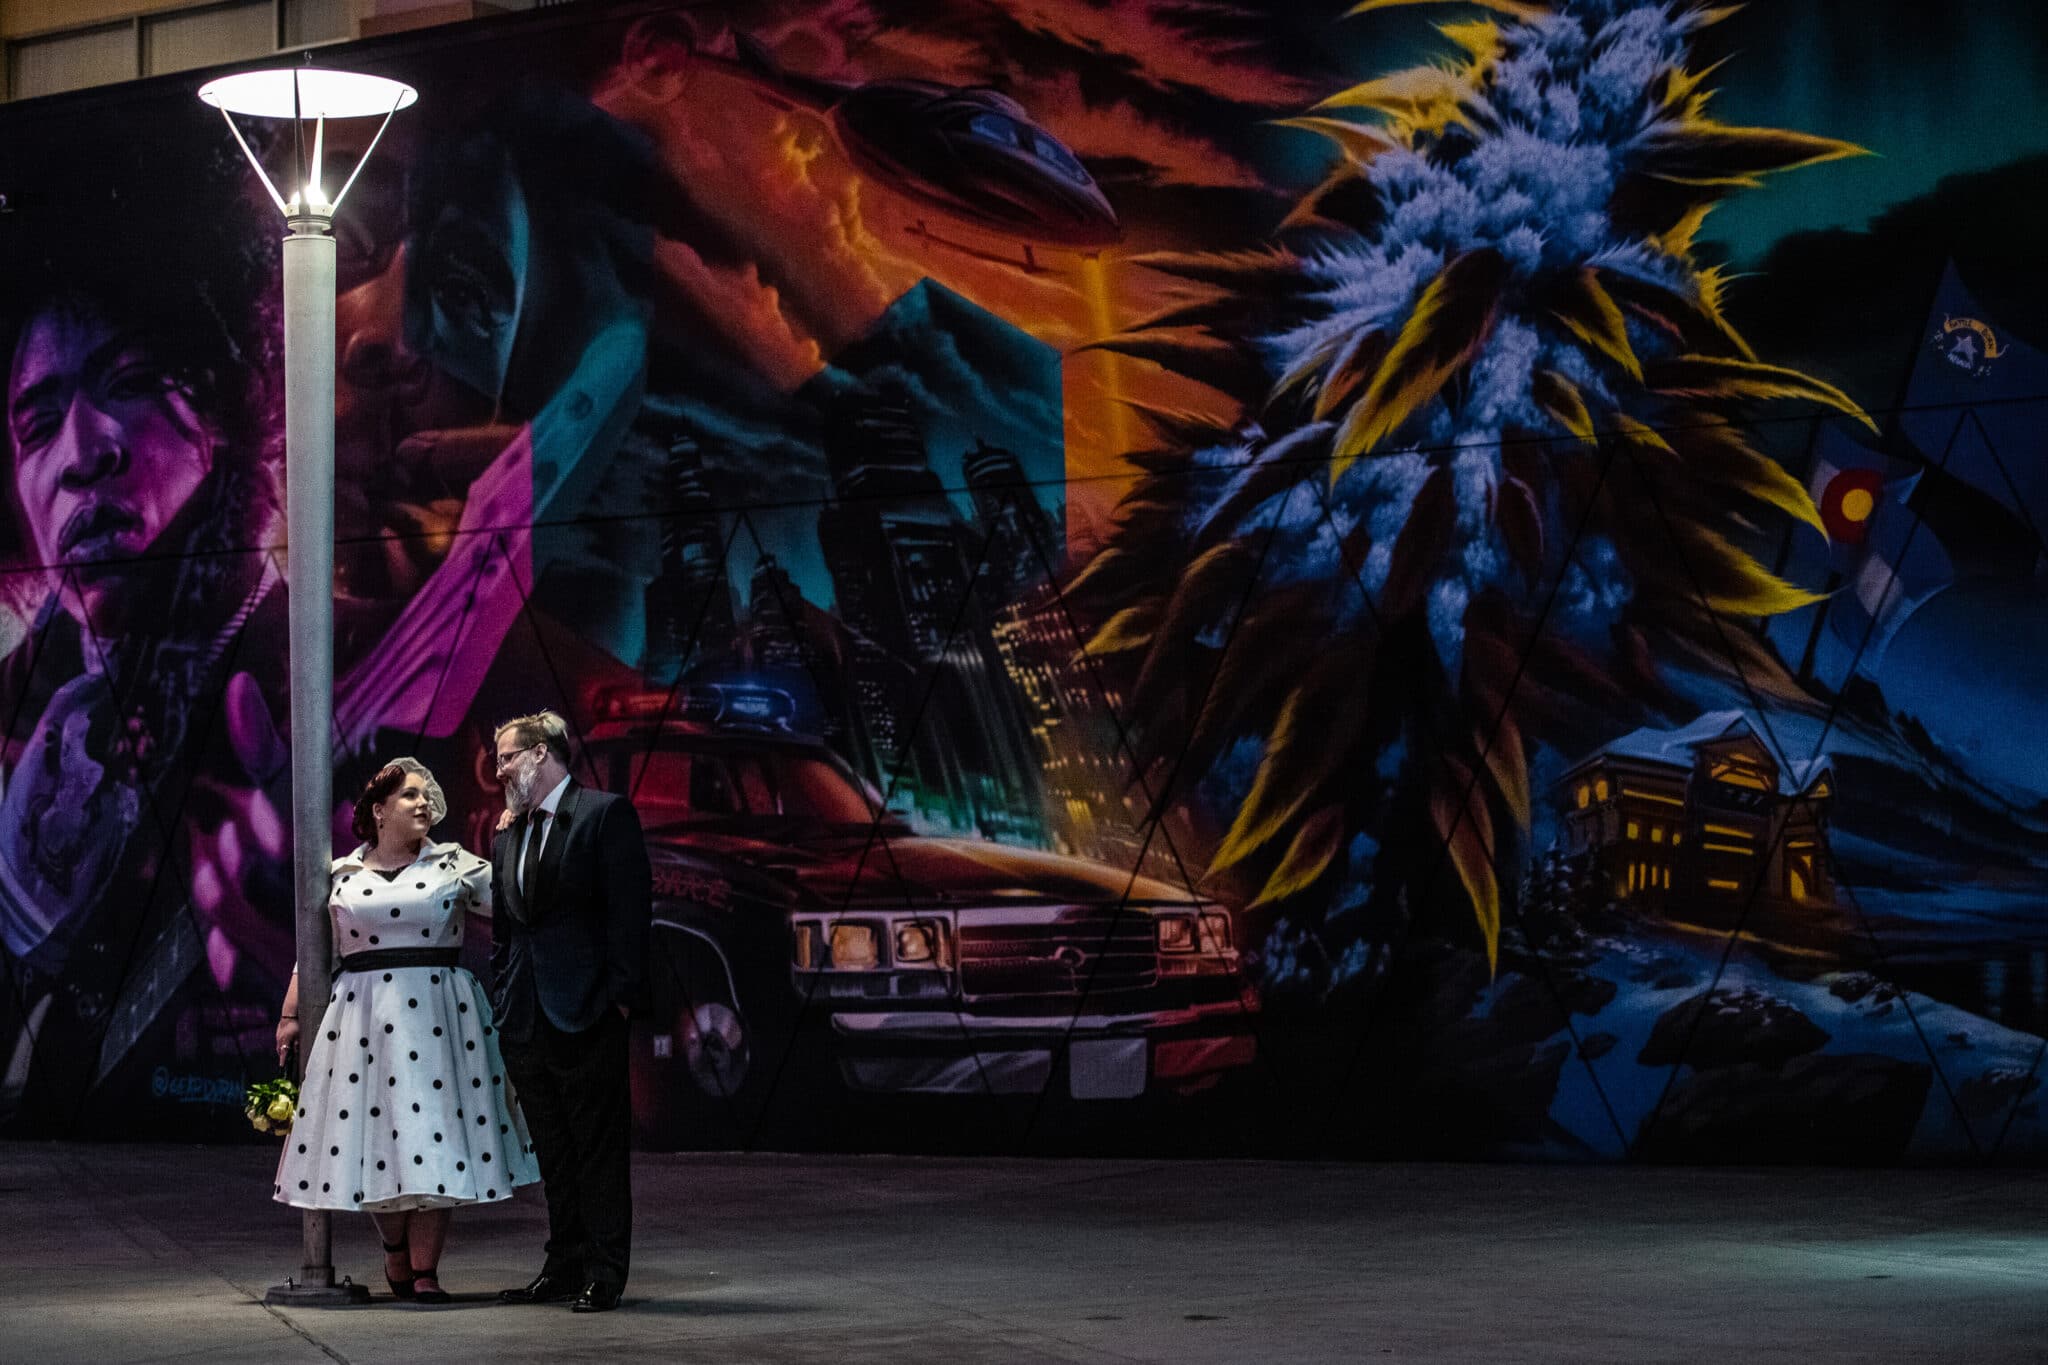 bride and groom standing in front of mural at night